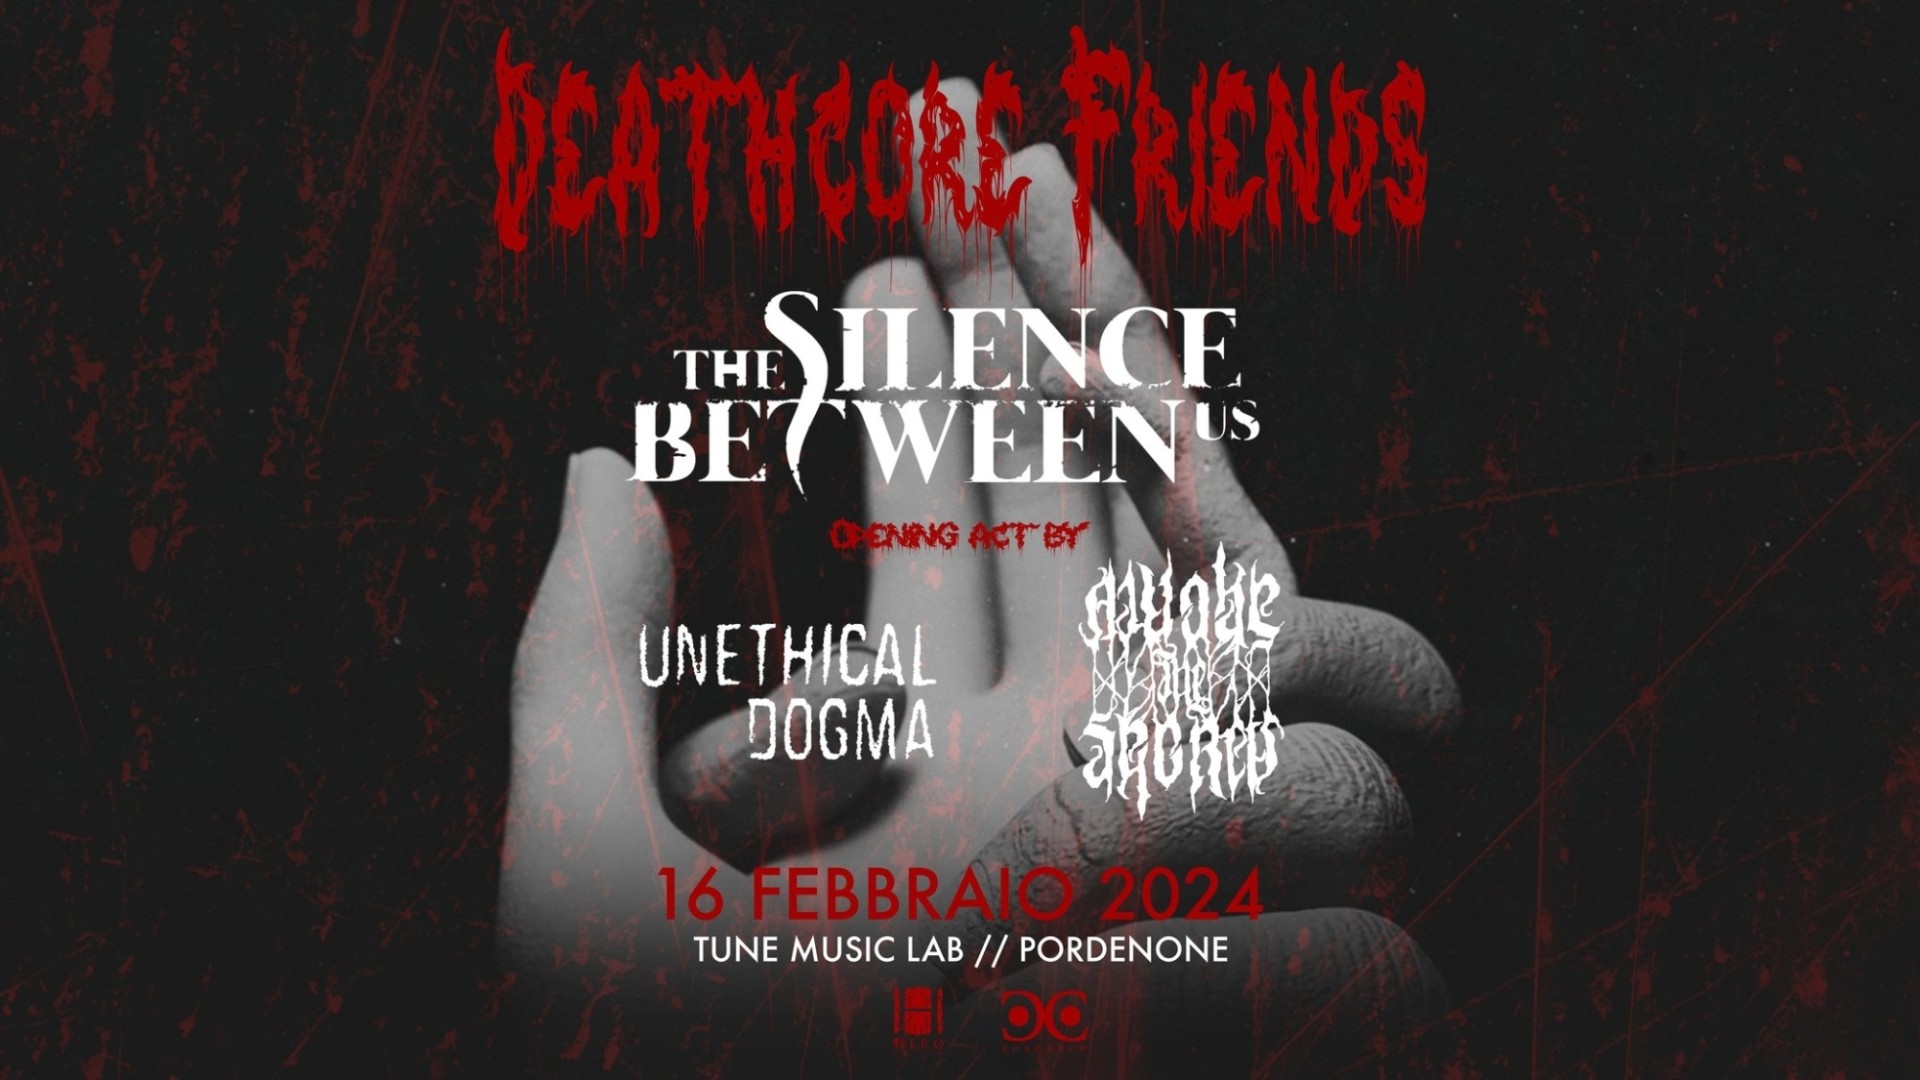 Deathcore Friends w/ The Silence Between Us, Awake The Secrets & Unethical Dogma